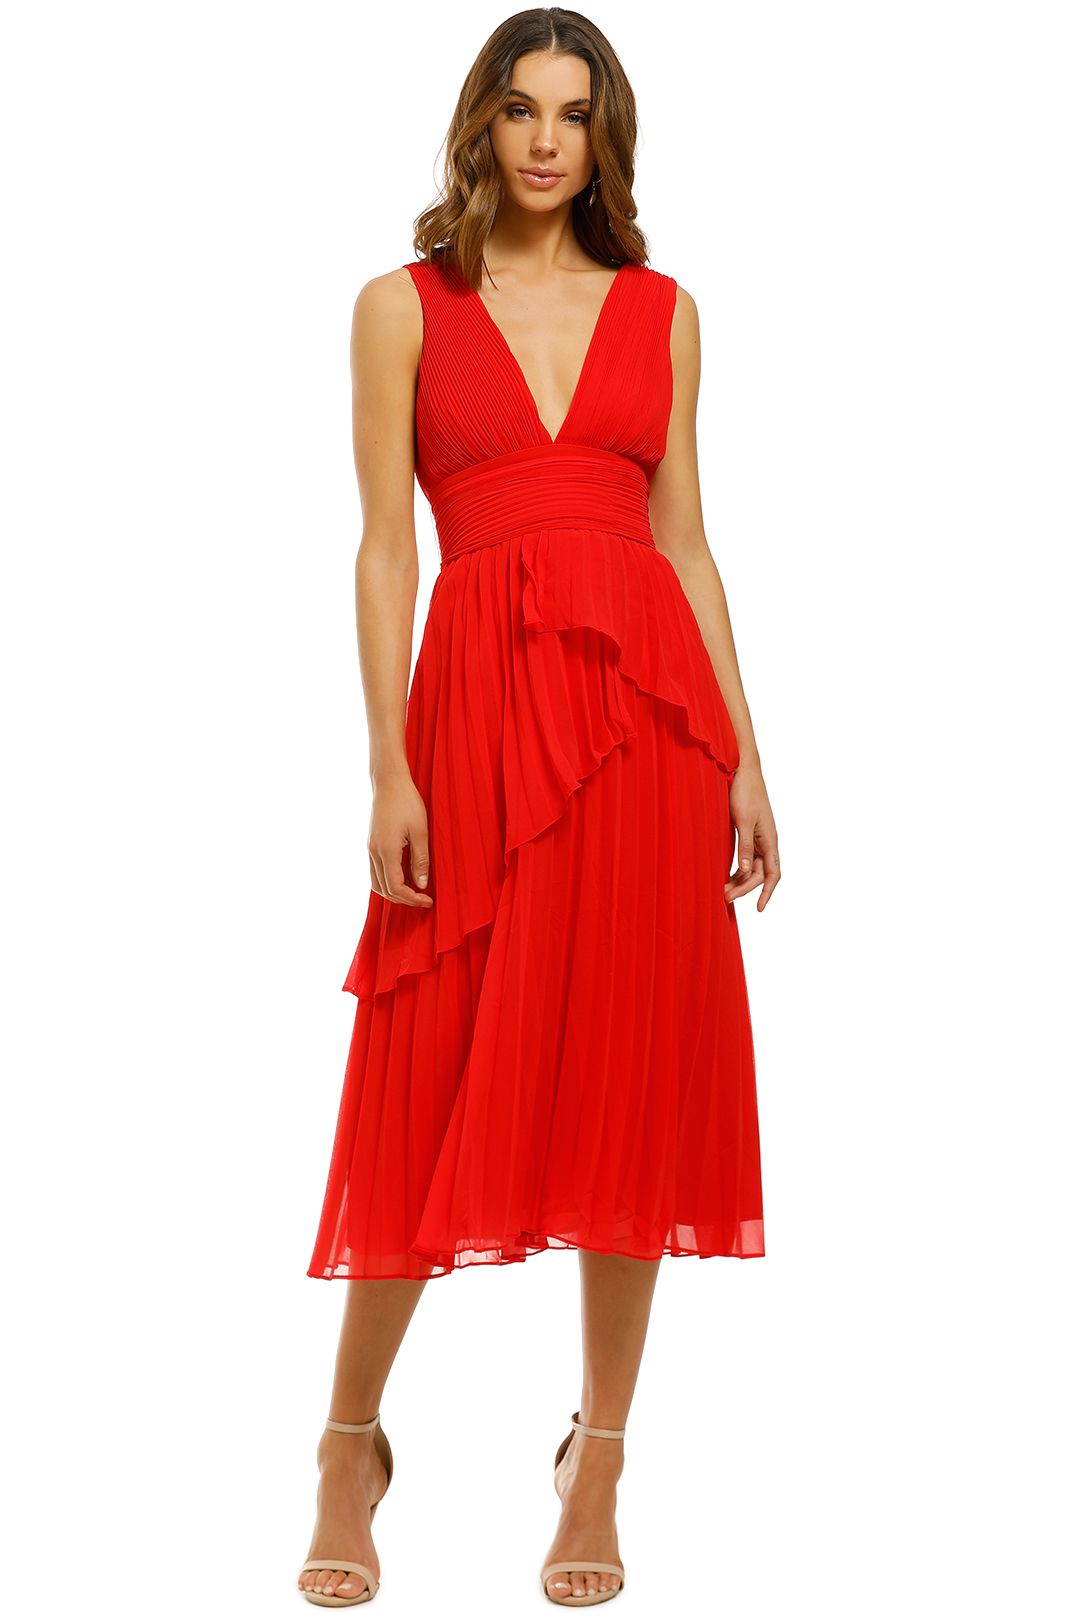 Talulah-Sugar-and-Spice-Midi-Dress-Red-Front